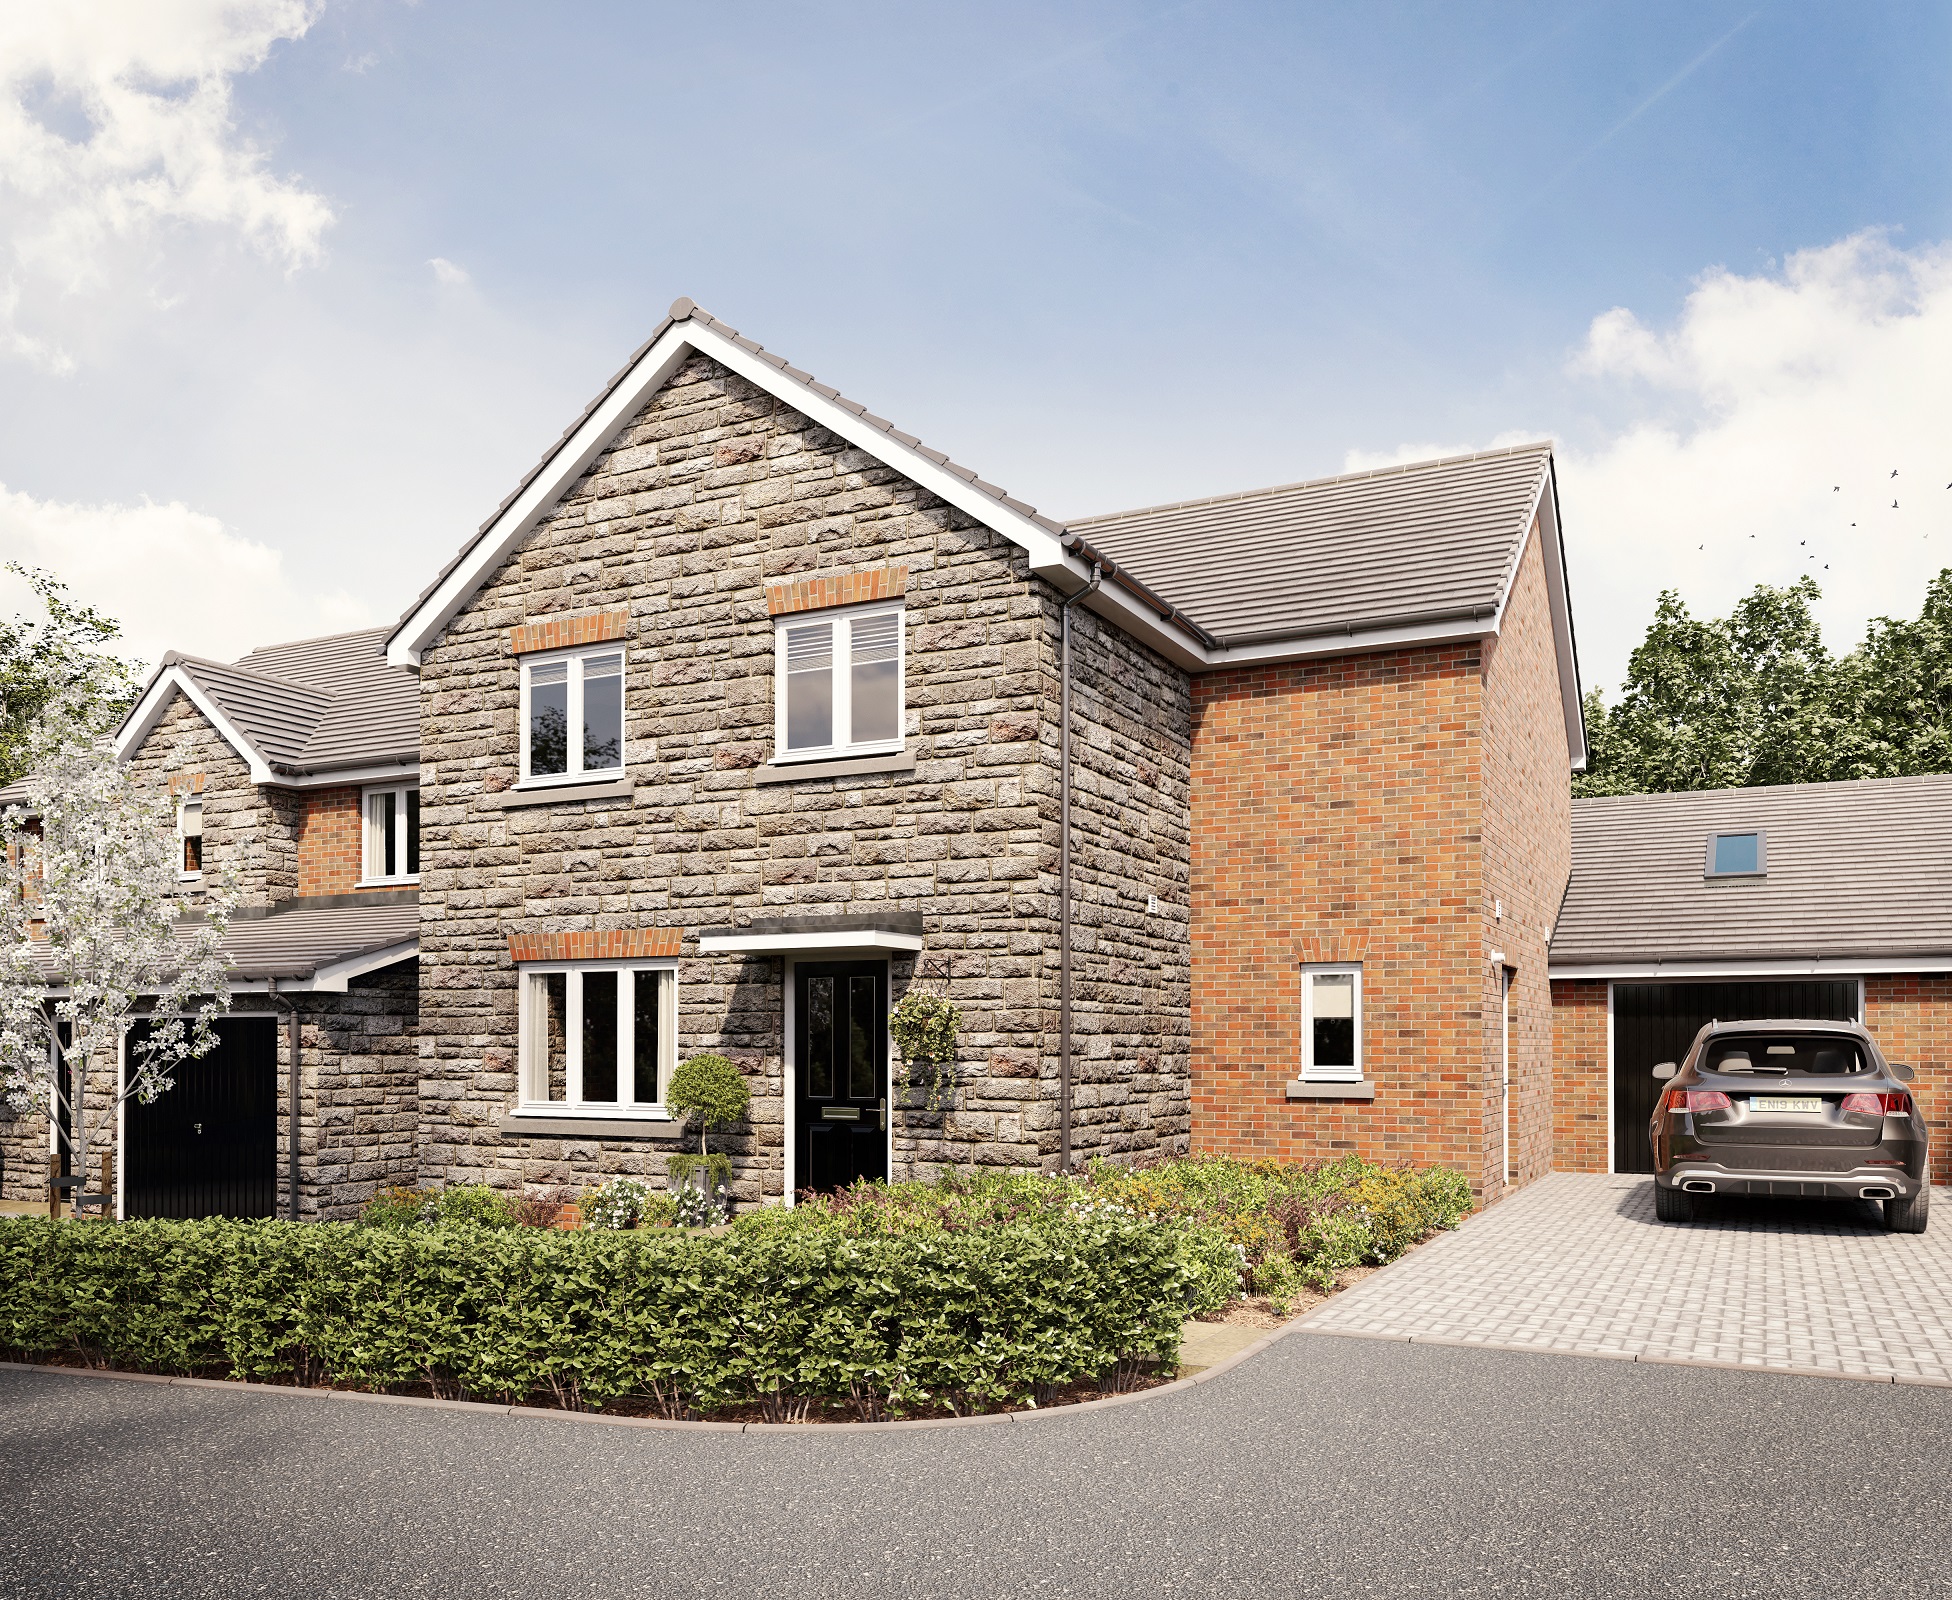 Artist's impression of Usk showhome at Dandara's Golwg Gwendraeth development close to Ffos Las racecourse.